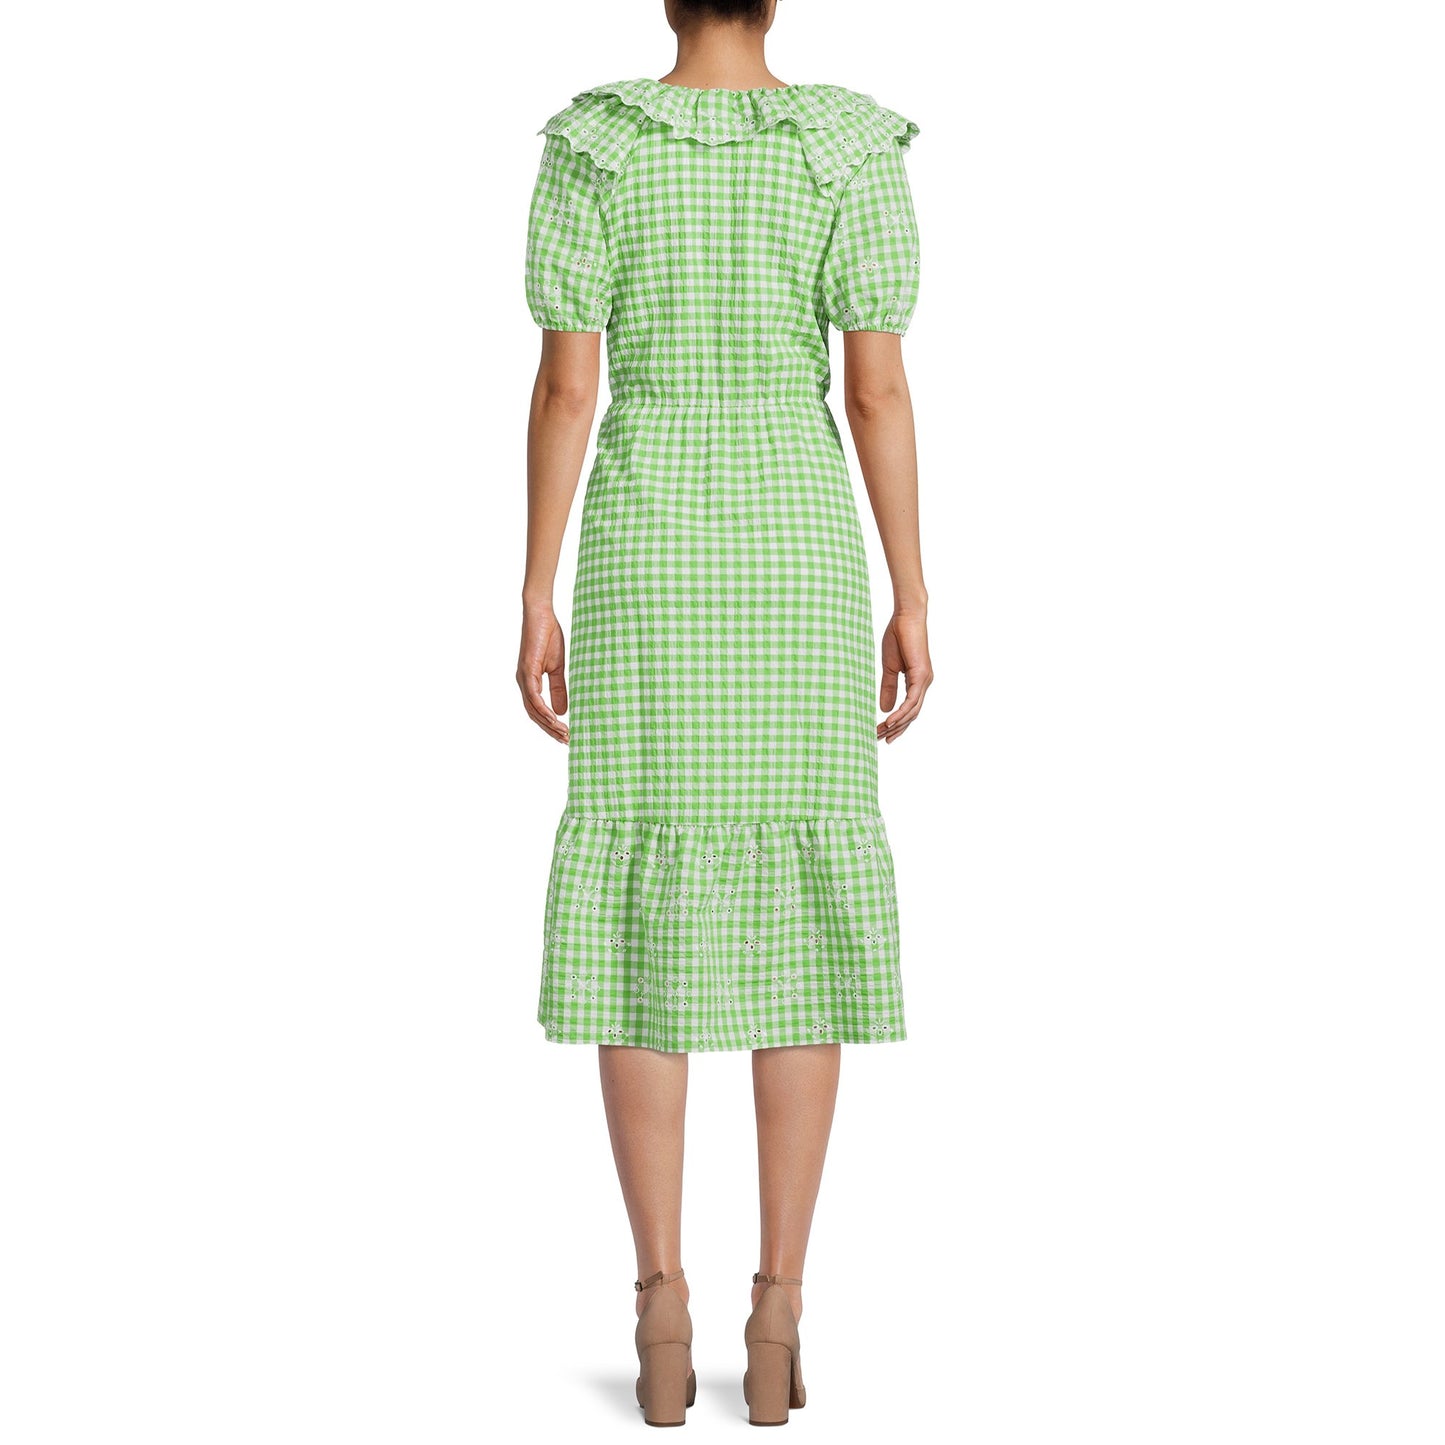 The Get Womens Eyelet Ruffle Midi Dress with Short Sleeves